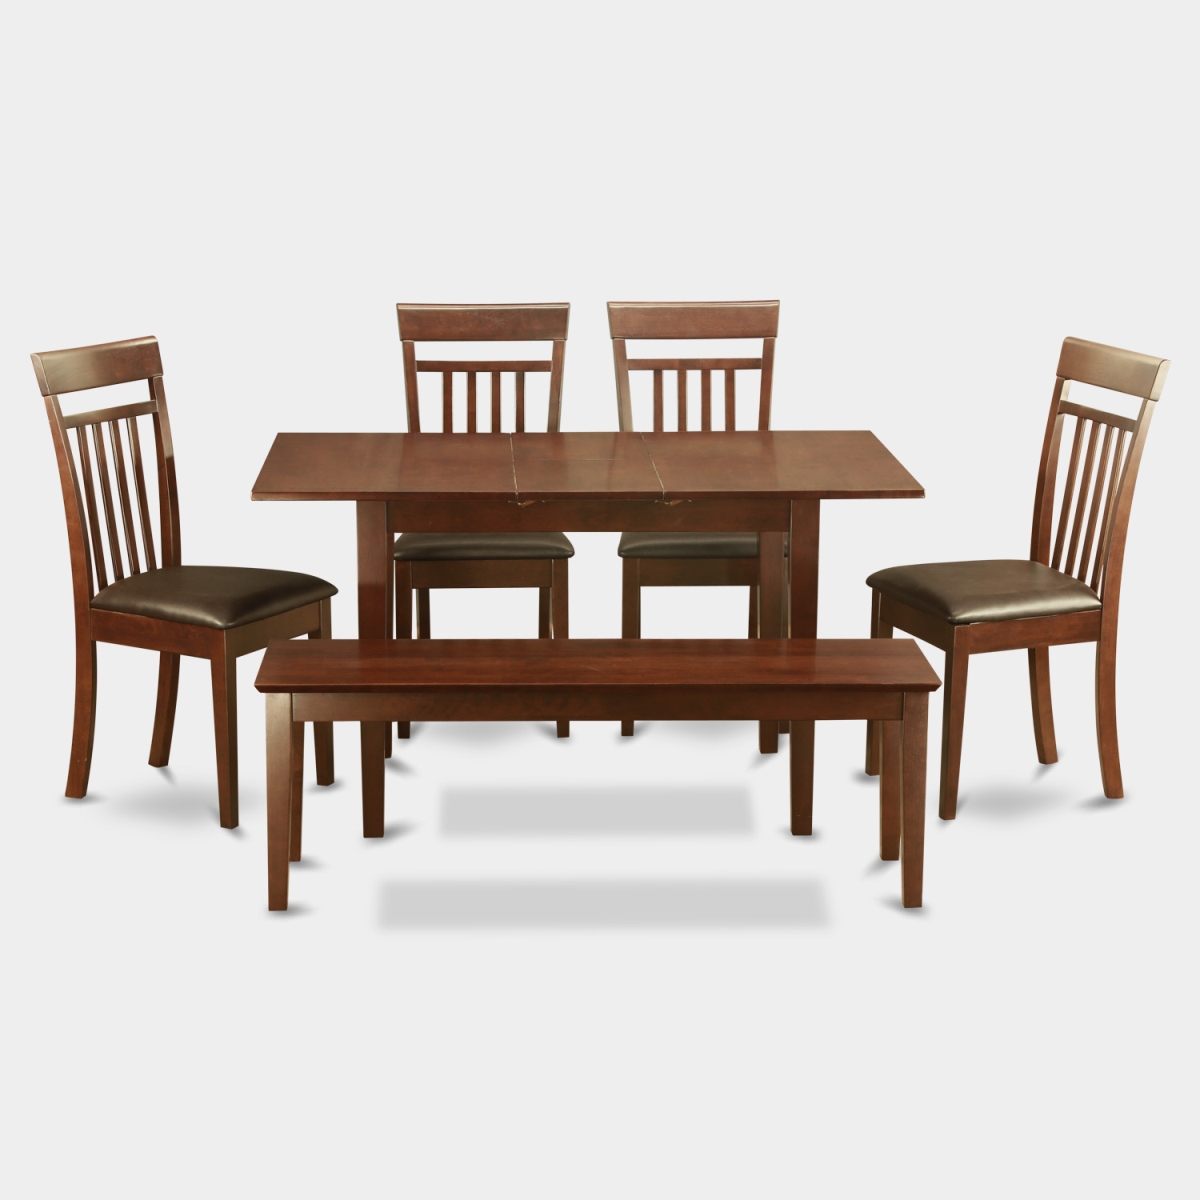 Picture of East West Furniture NOCA6C-MAH-LC Table & Chairs Set - Kitchen Table & 4 Chairs Plus One Bench - 6 Piece